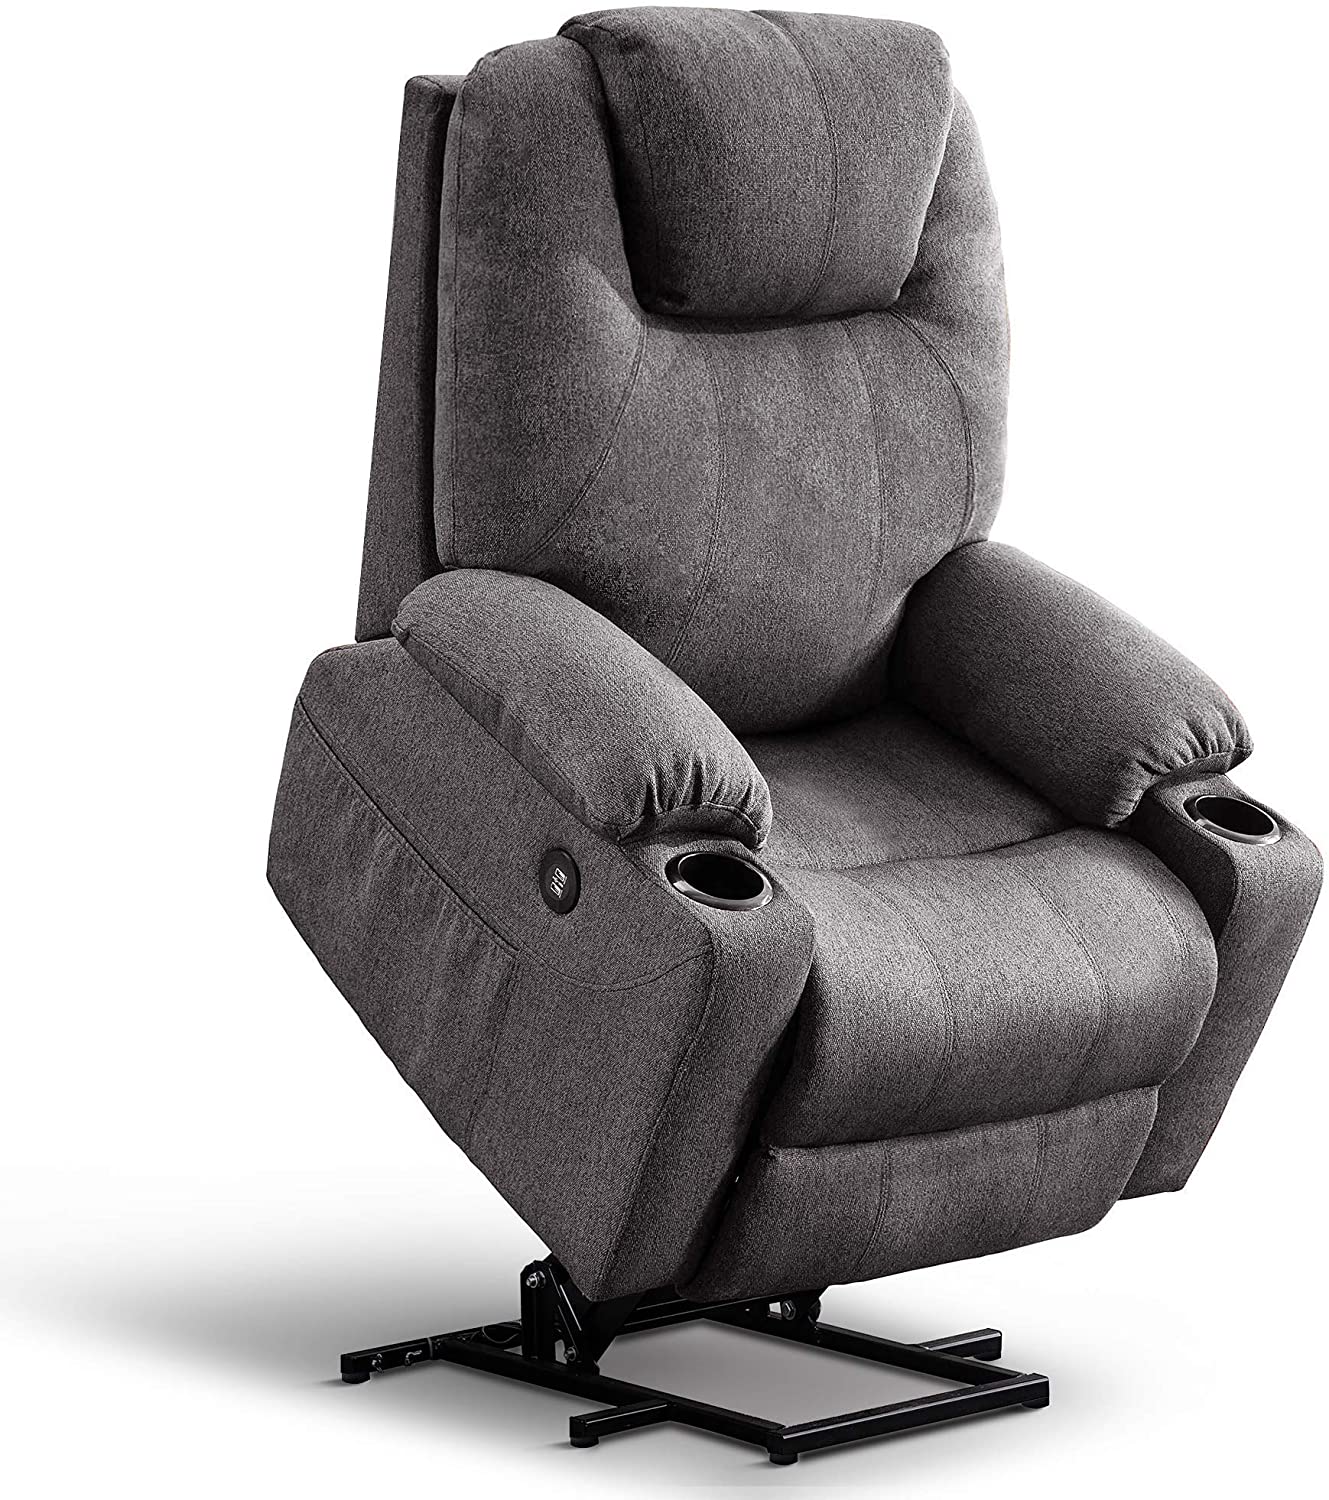 Mcombo Large Power Lift Recliner Chair